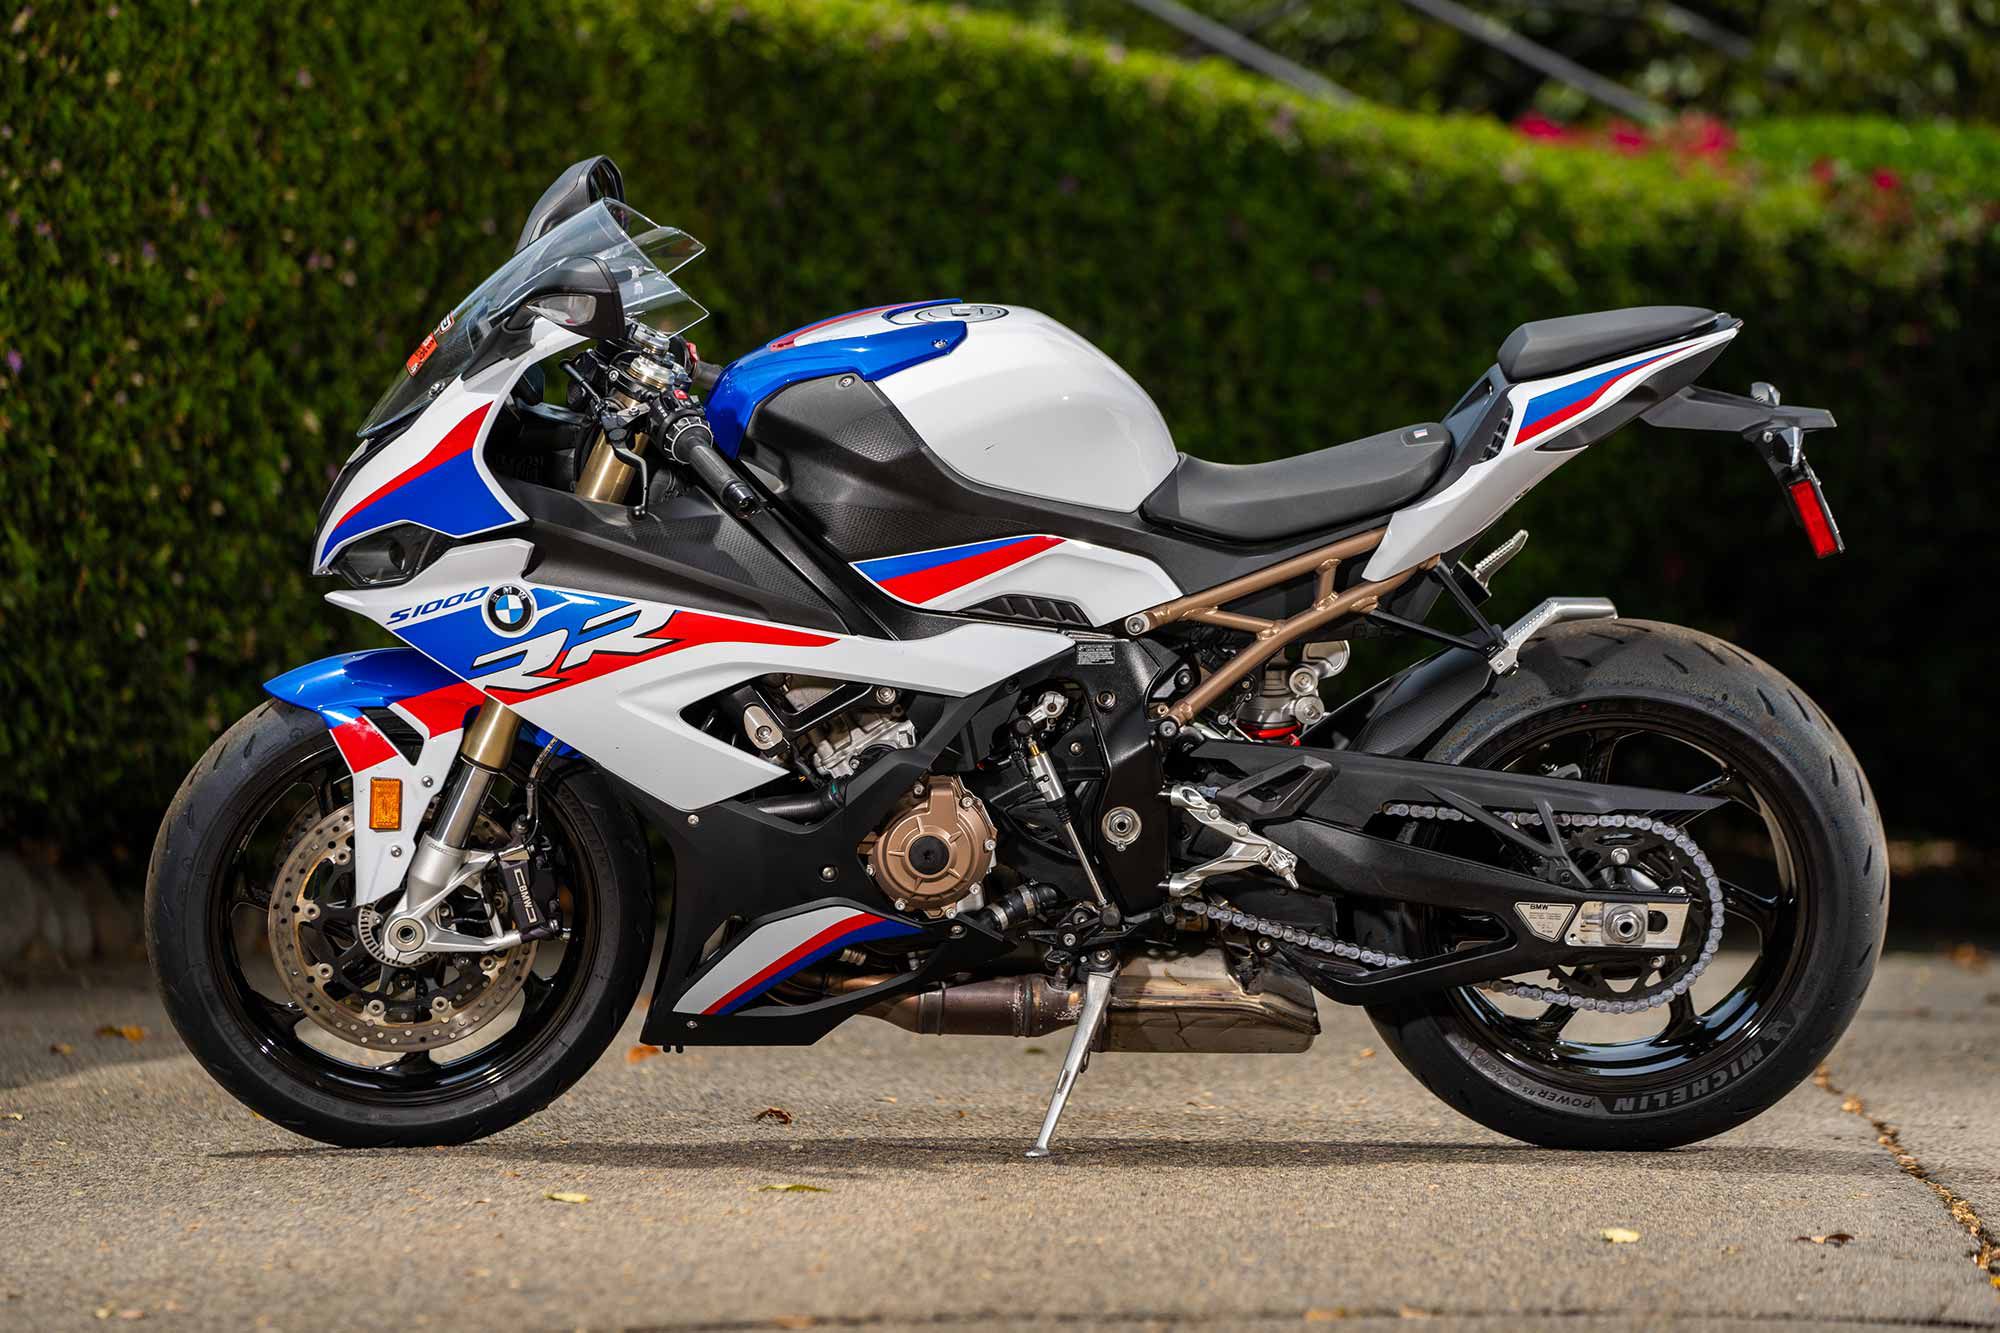 We swing a leg over BMW’s mighty 2021 S 1000 RR superbike in this review.